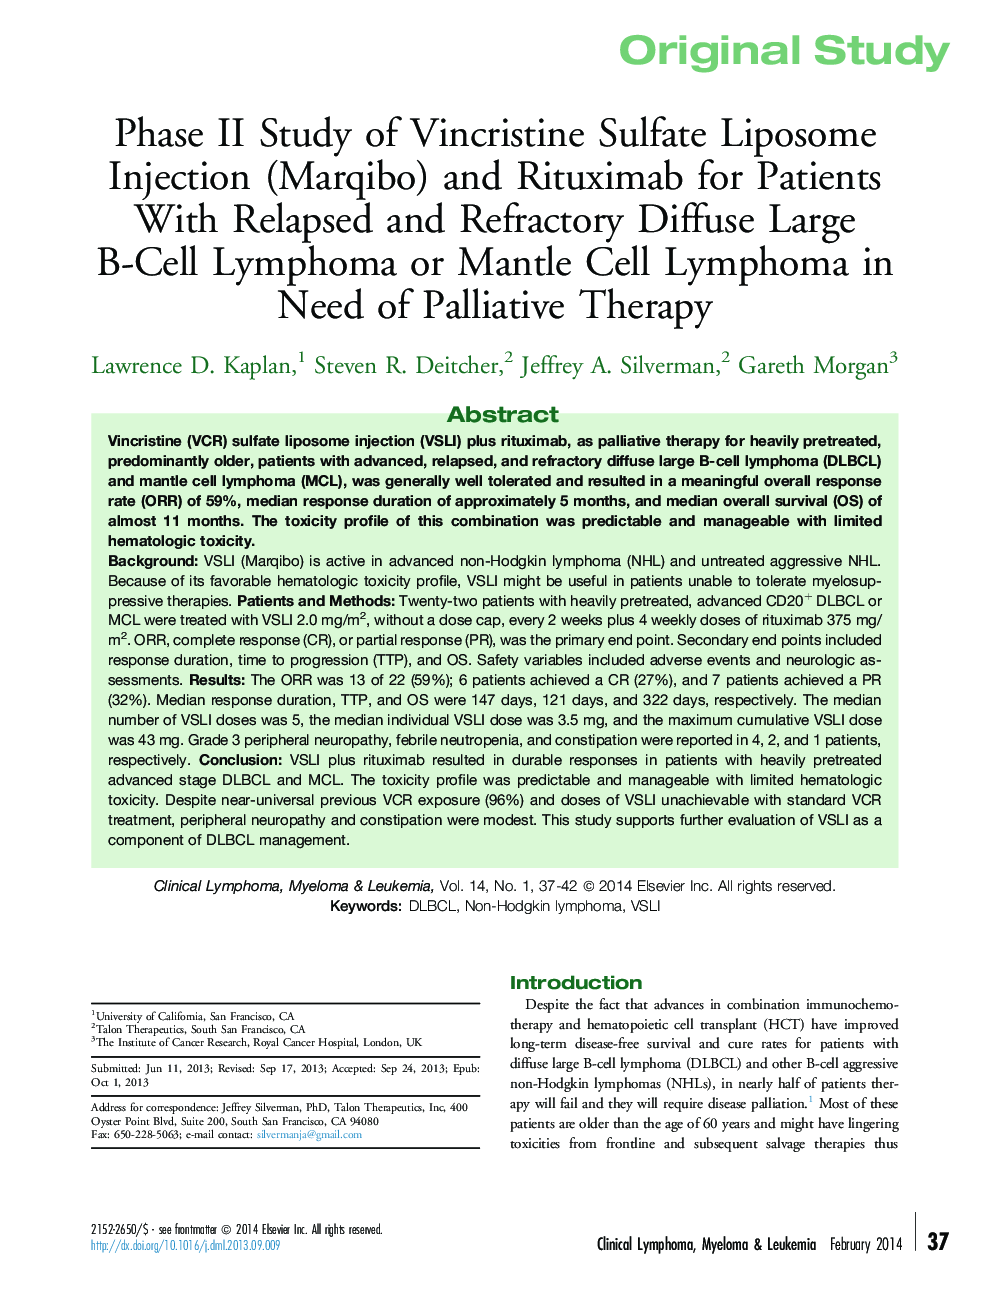 Phase II Study of Vincristine Sulfate Liposome Injection (Marqibo) and Rituximab for Patients With Relapsed and Refractory Diffuse Large B-Cell Lymphoma or Mantle Cell Lymphoma in Need of Palliative Therapy